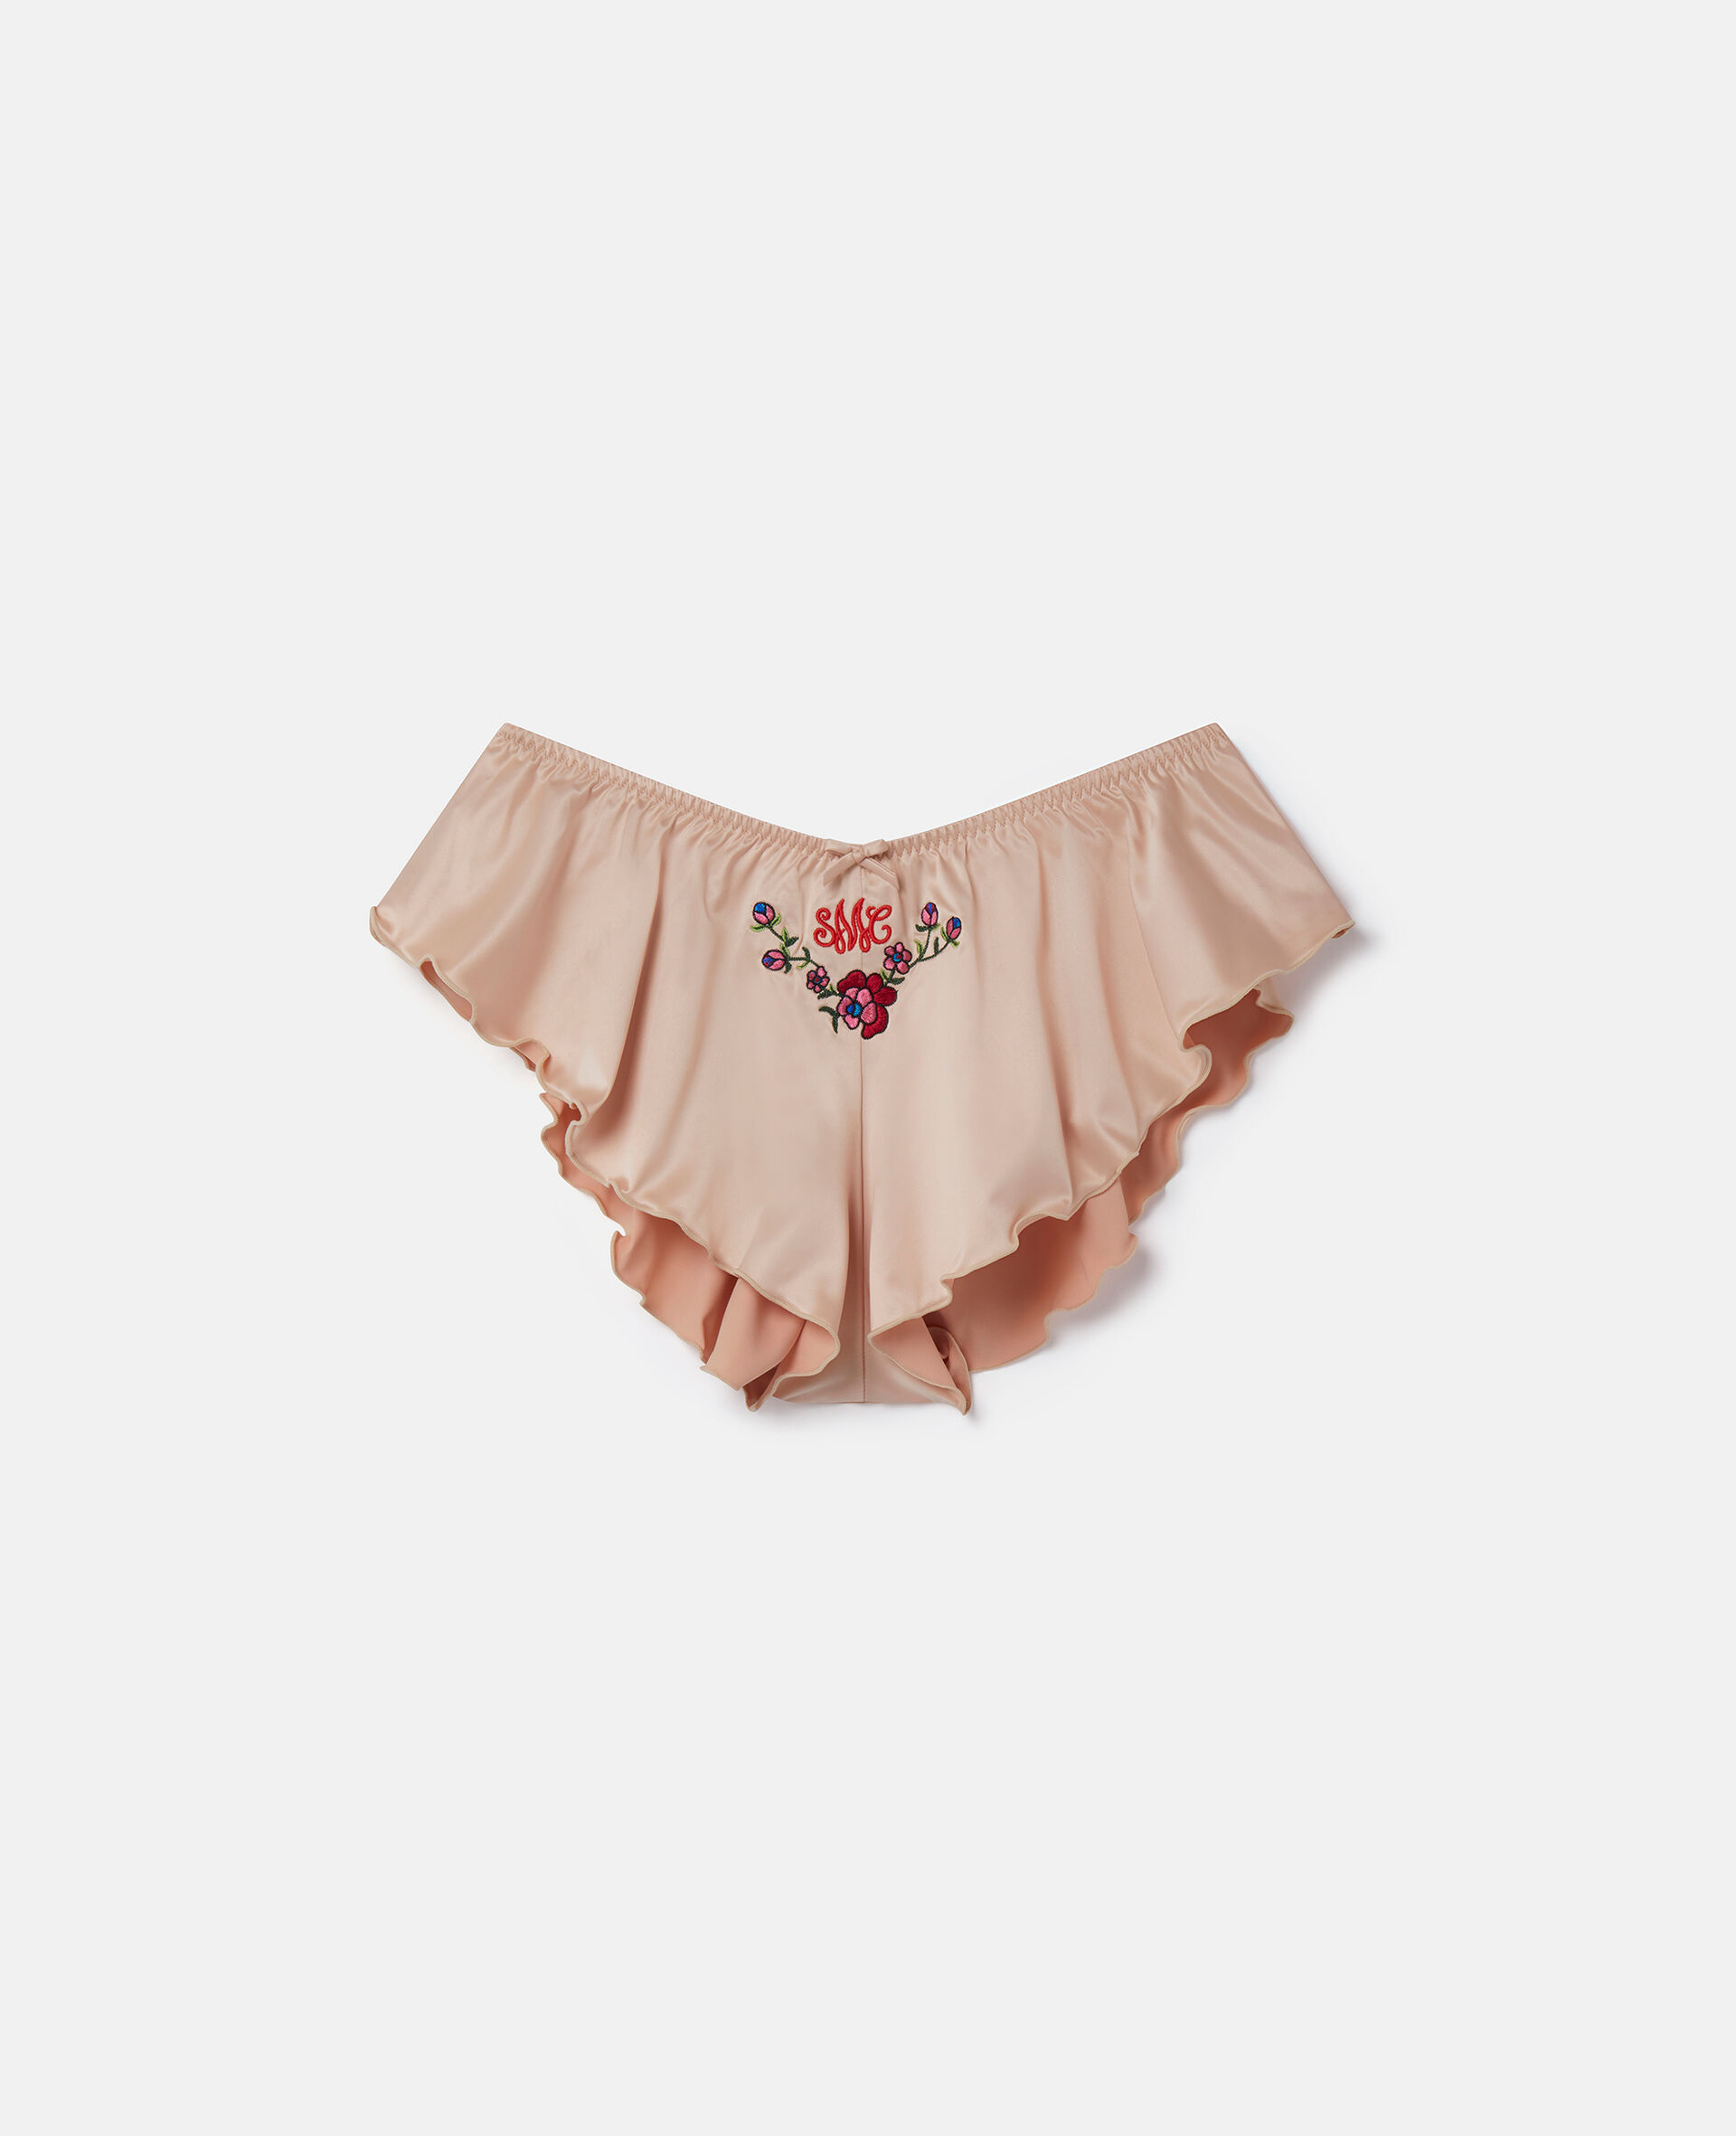 'Love You' Embroidery Satin Flounce Sleep Shorts-Beige-large image number 0